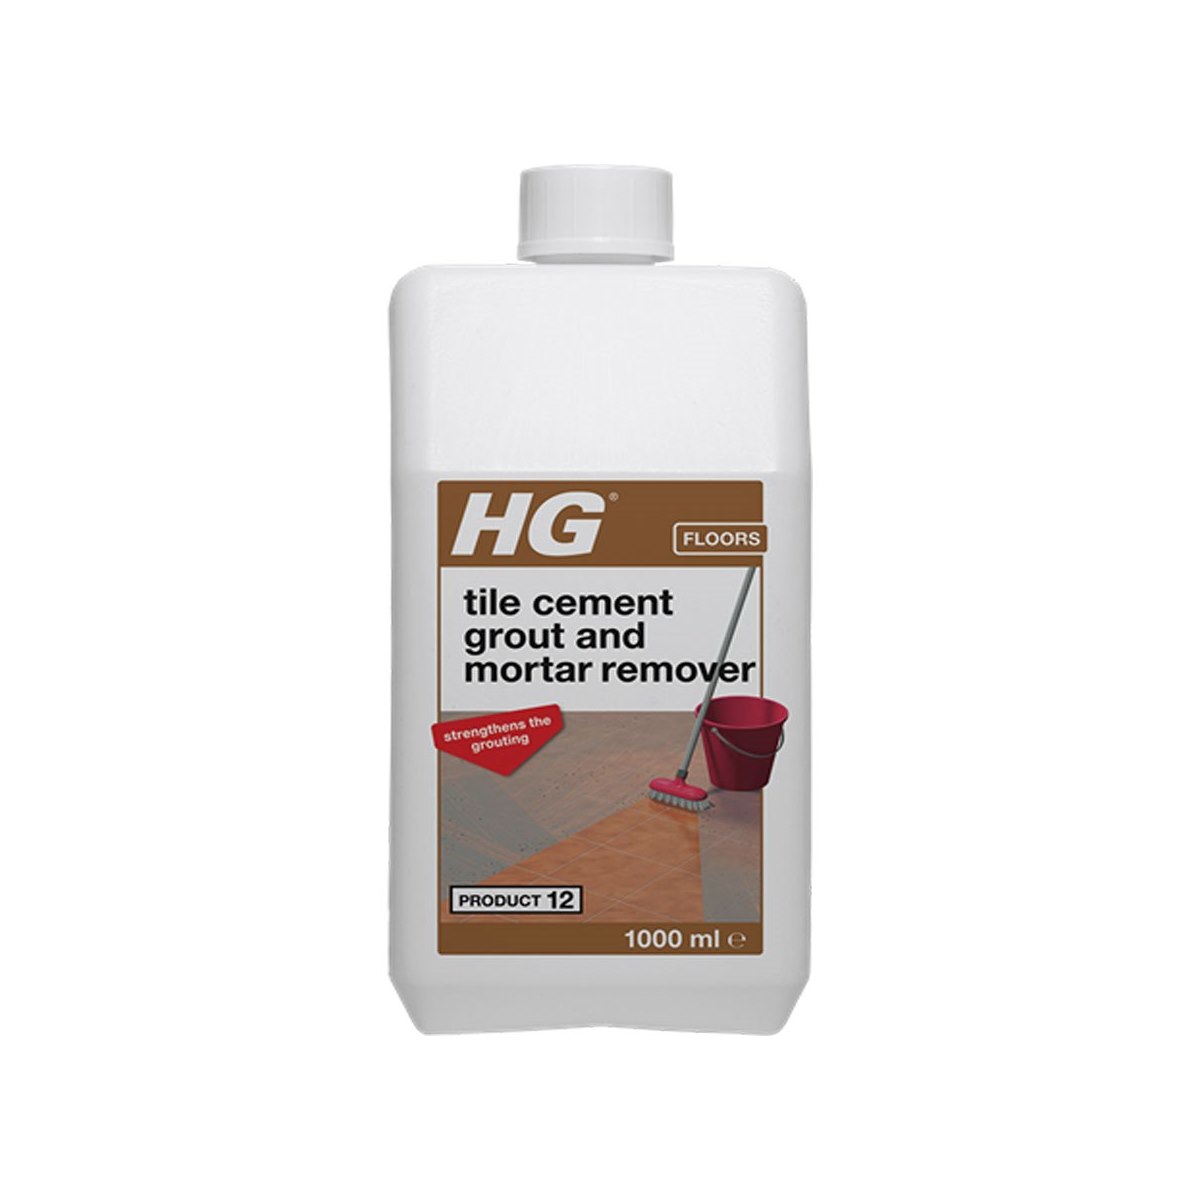 HG Tile Cement Grout and Mortar Remover 1 Litre Product 12